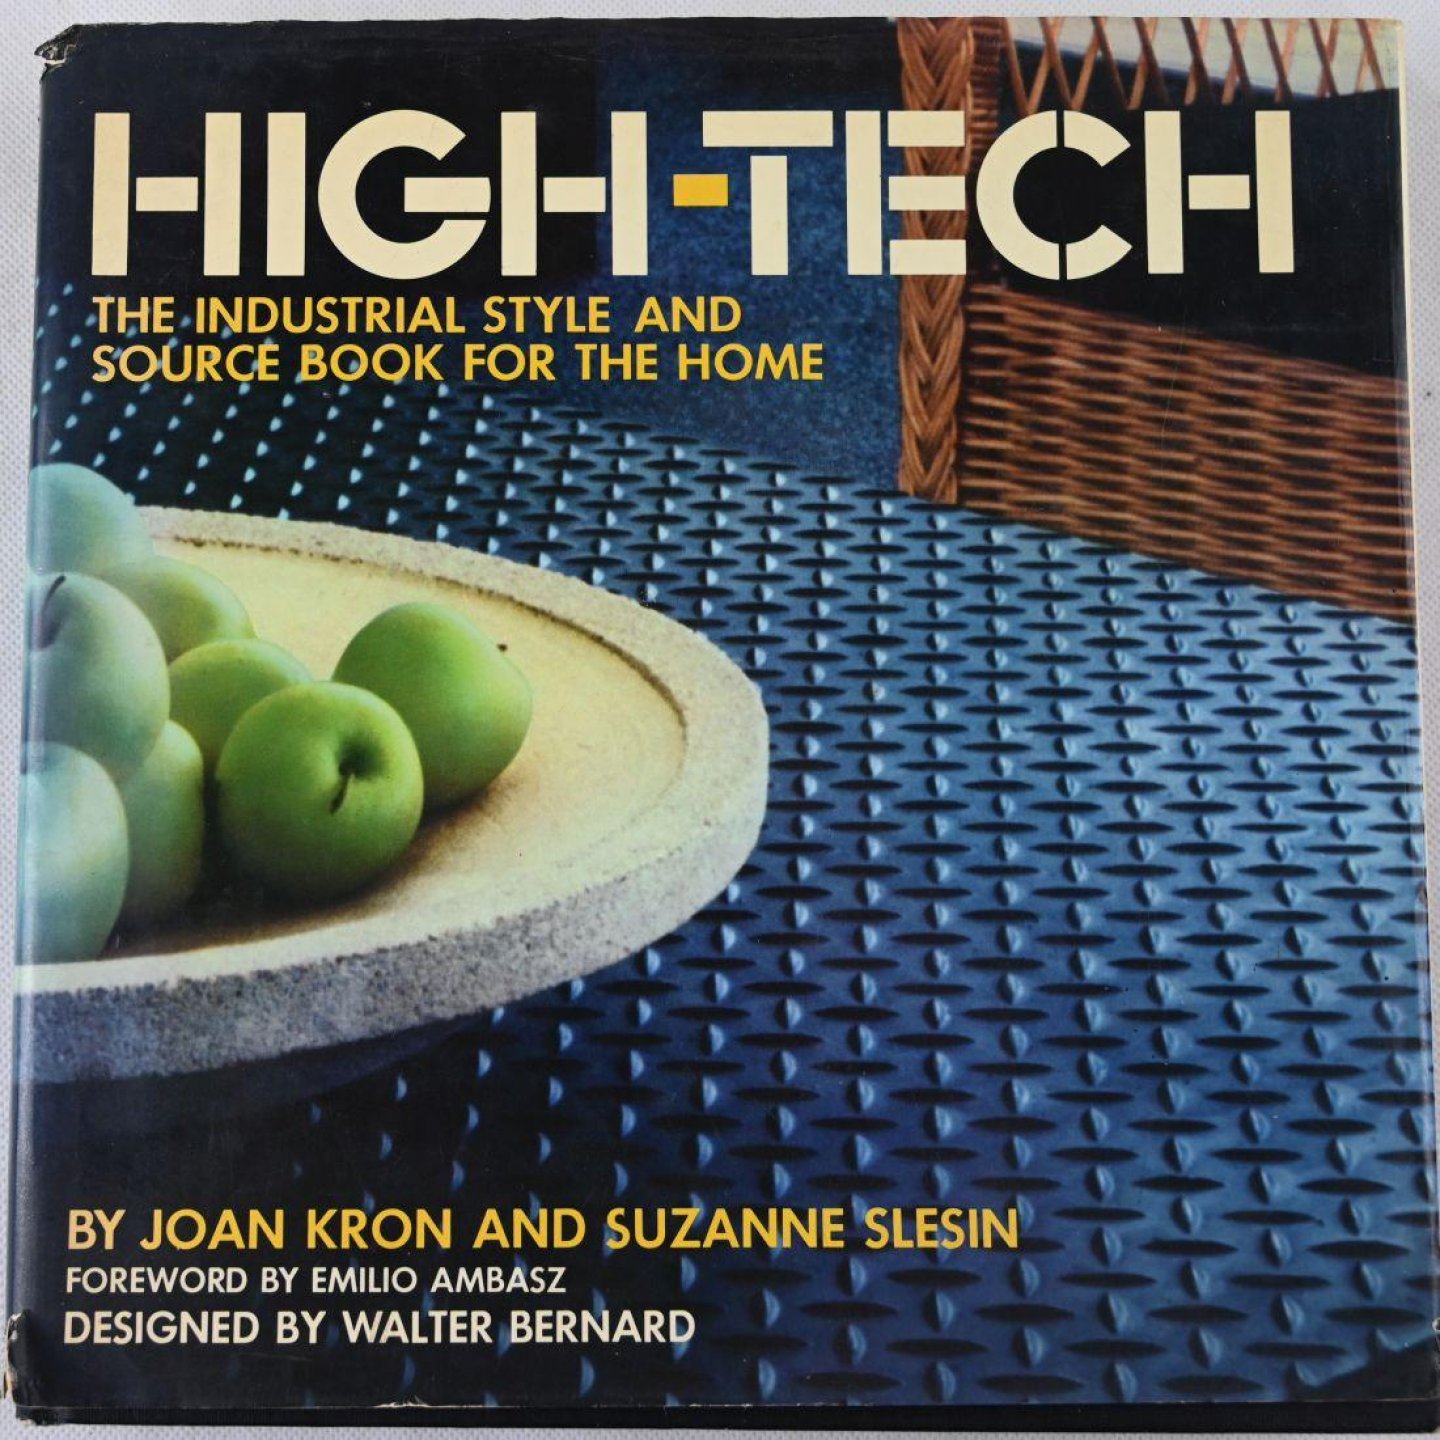 Kron, Joan and Slesin, Suzanne - High-Tech. The industrial style and source book for the home.